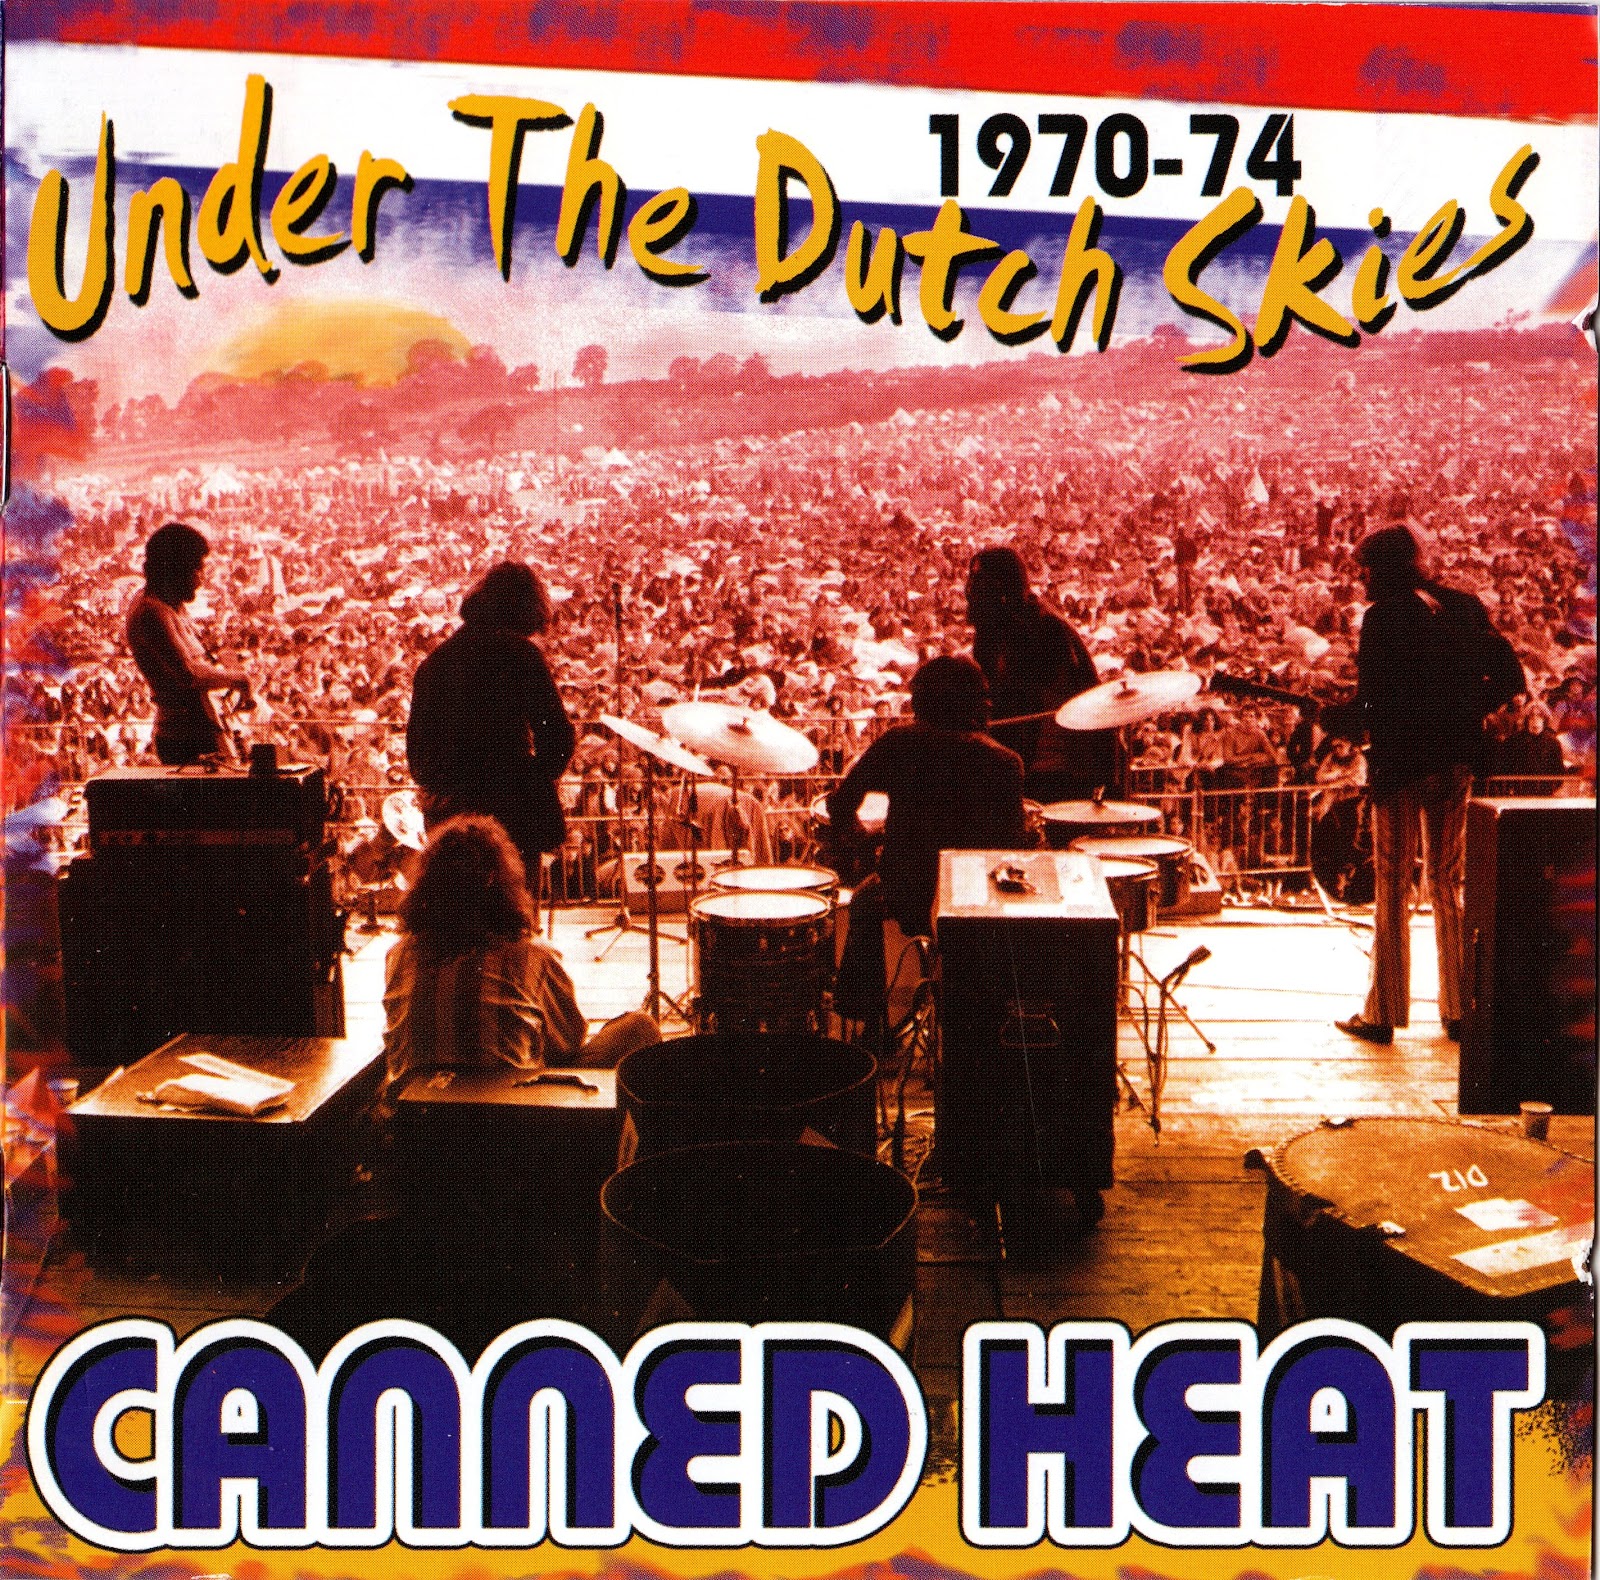 Canned heat steam фото 90